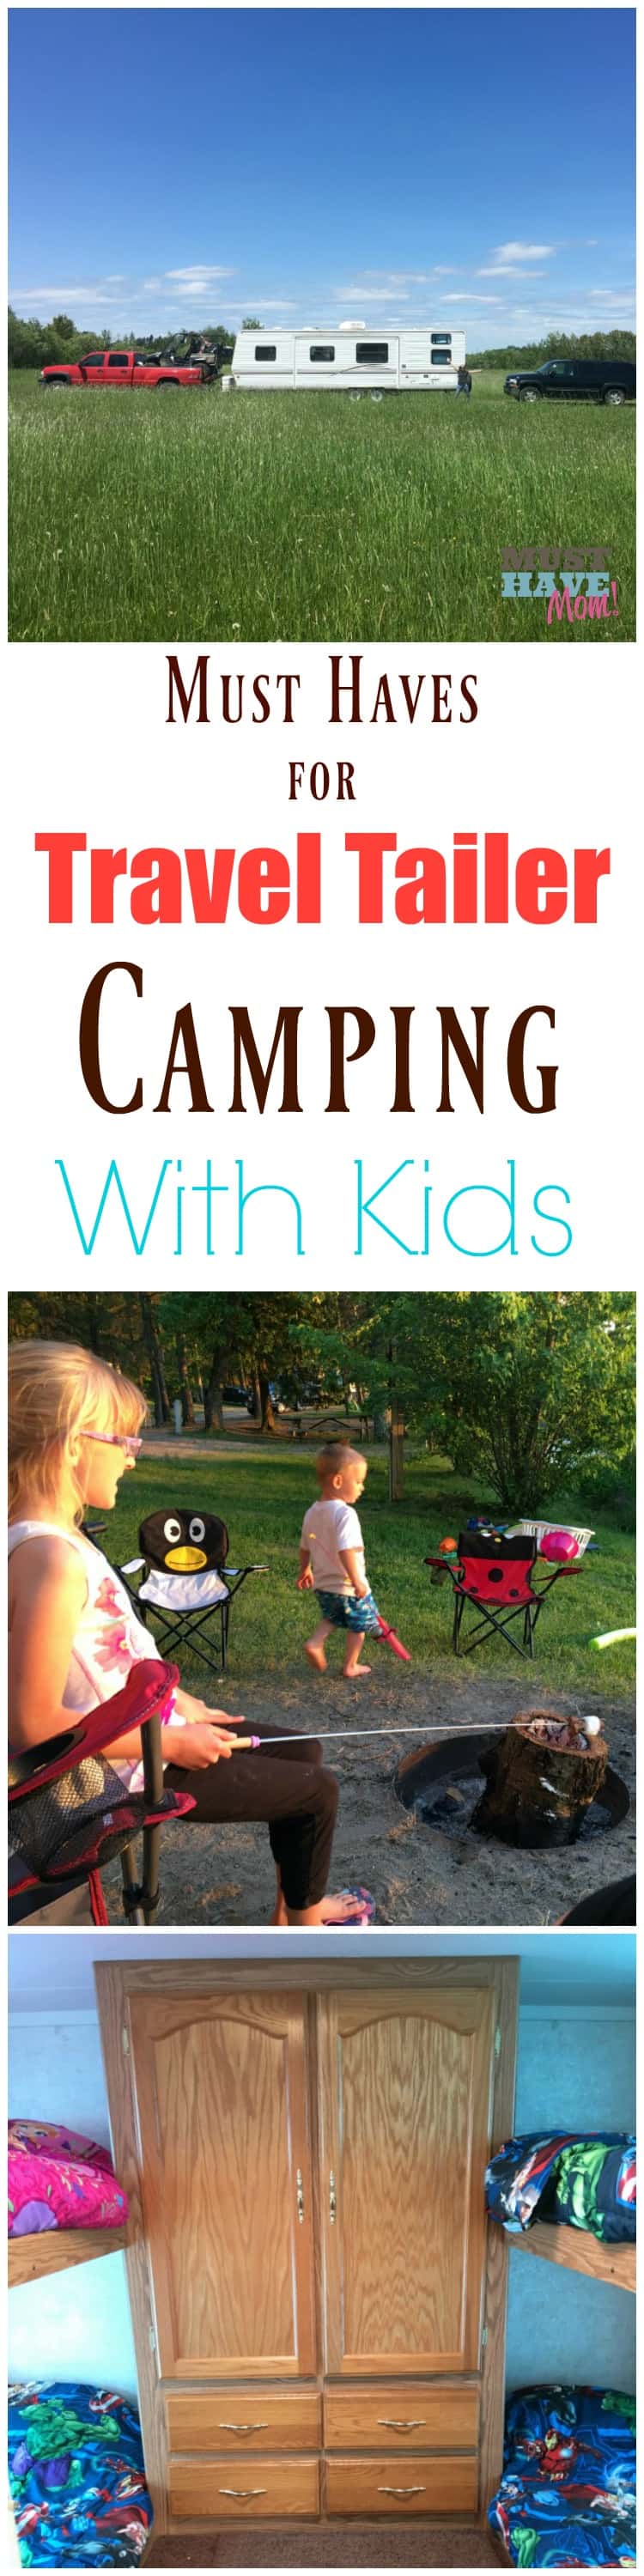 10 Must Haves For Travel Trailer Camping With Kids